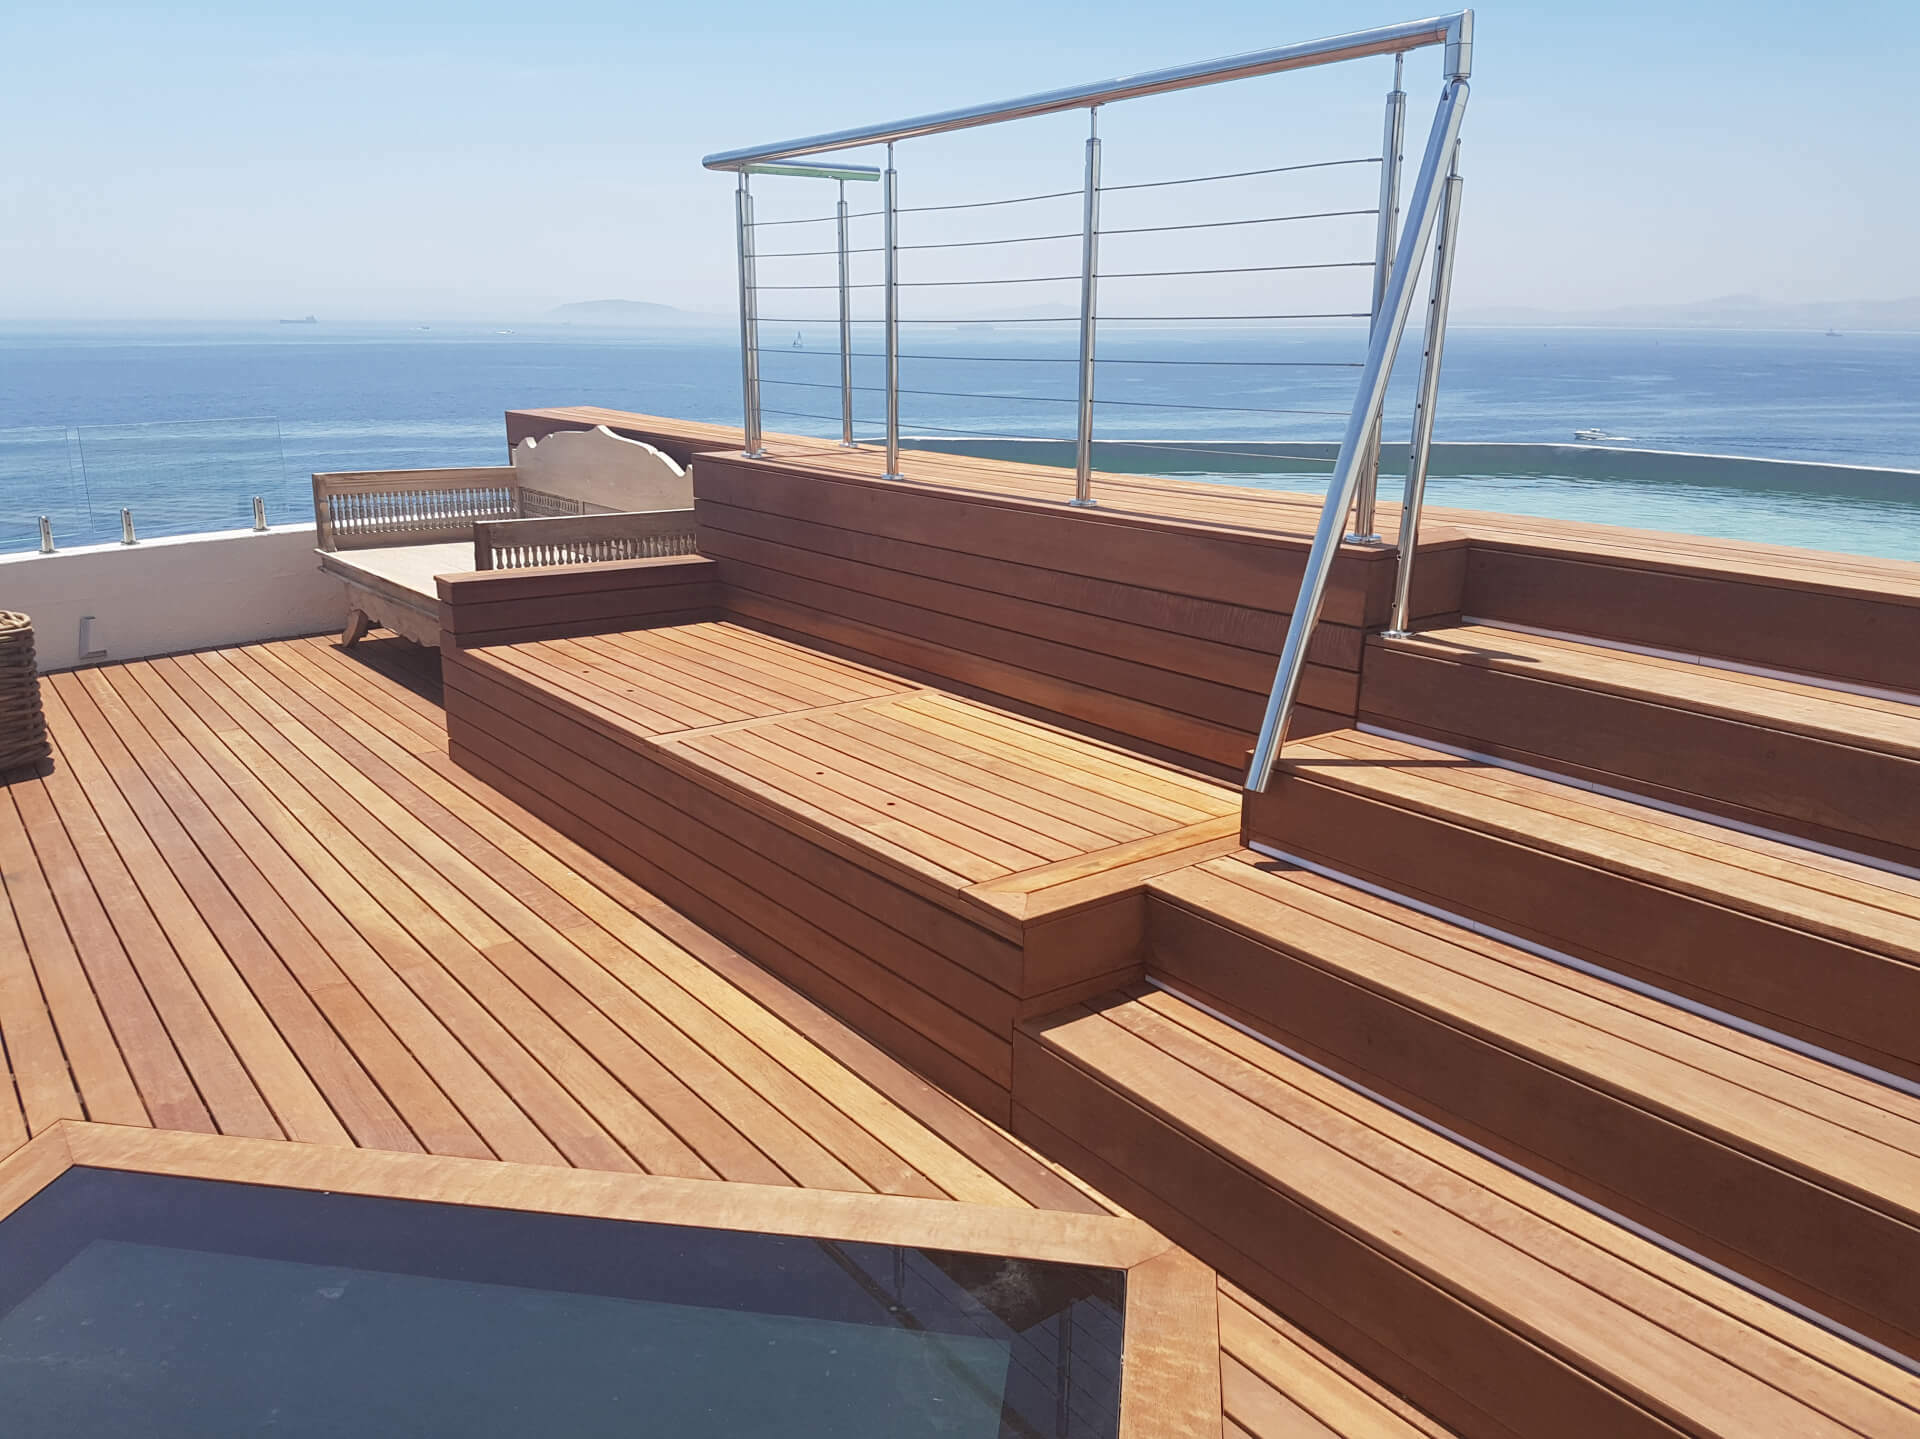 Timber deck with steps and chrome railing